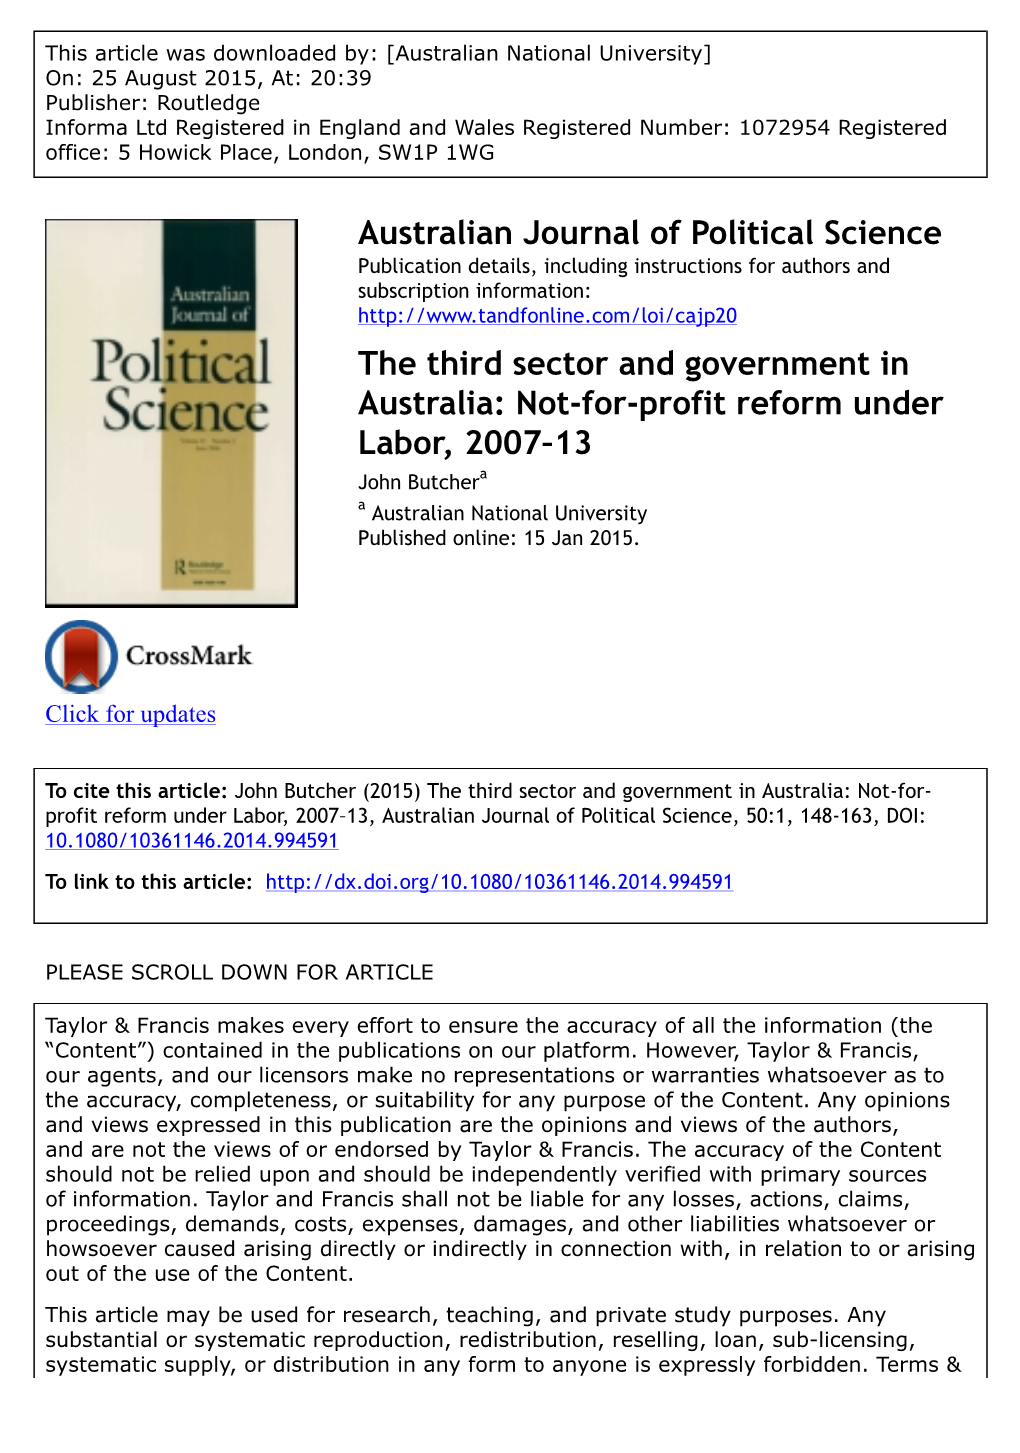 The Third Sector and Government in Australia: Not-For-Profit Reform Under Labor, 2007–13 John Butchera a Australian National University Published Online: 15 Jan 2015